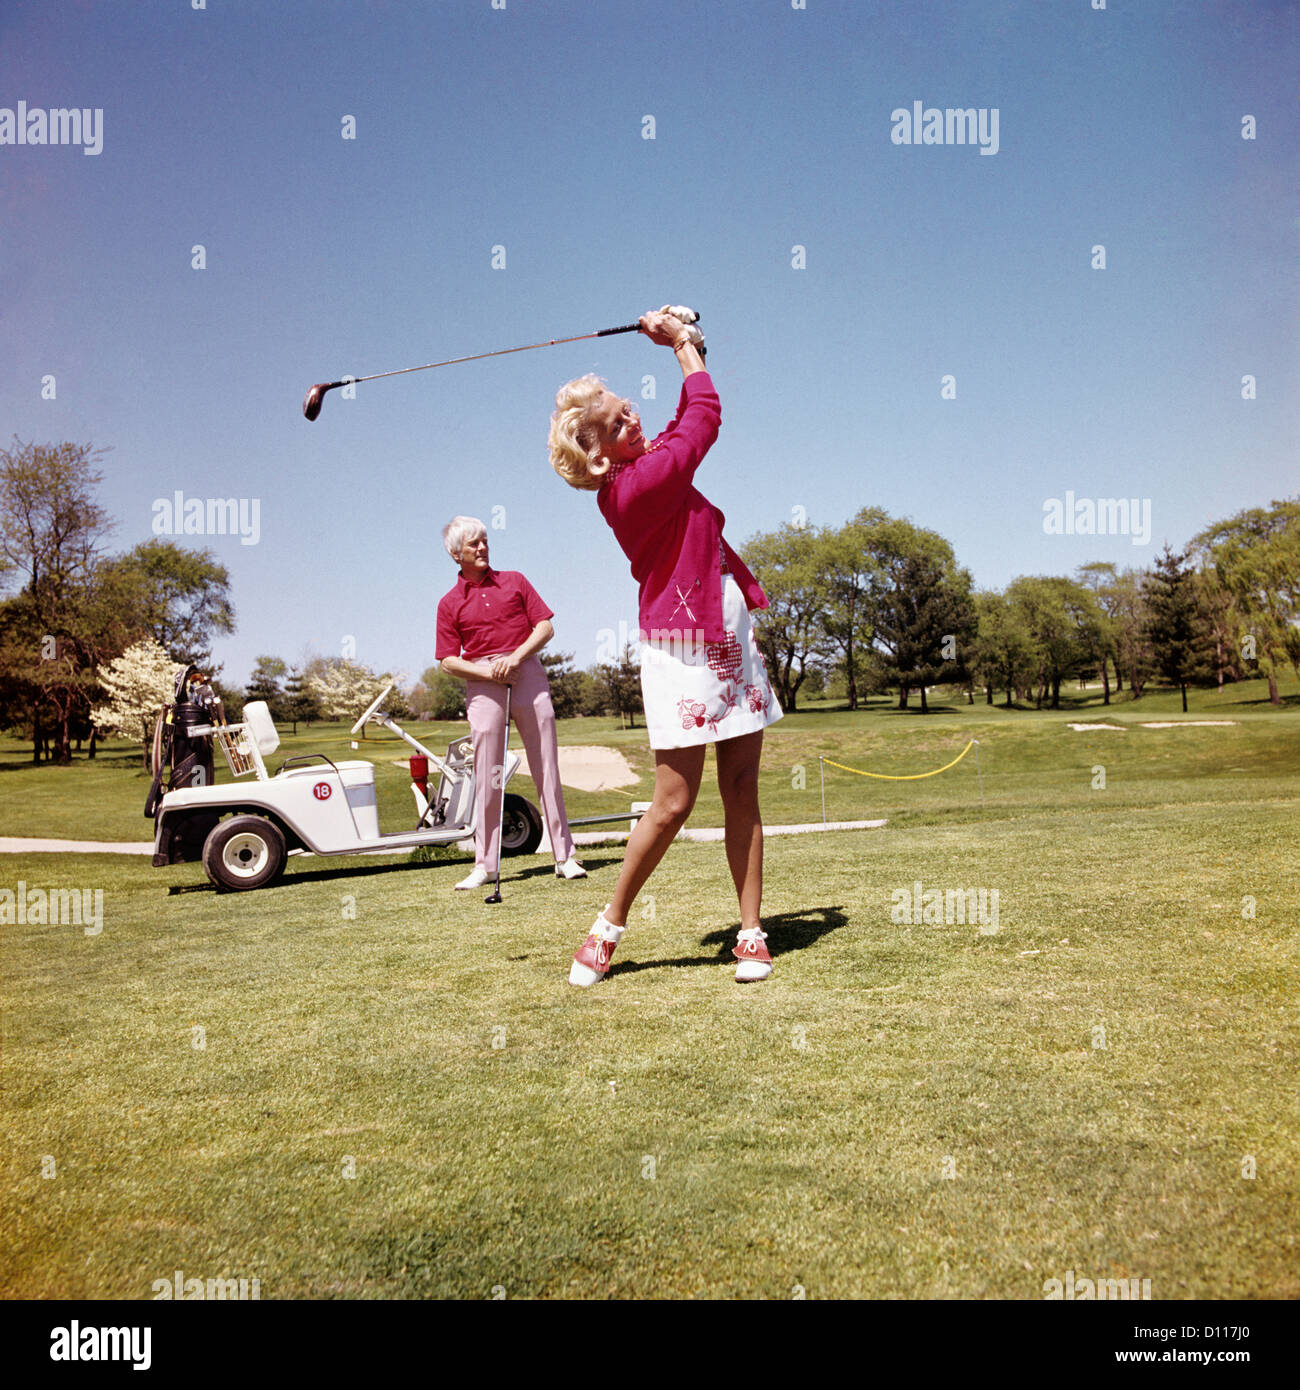 1970s MATURE WOMAN SWINGING GOLF CLUB AS MAN STANDS BY GOLF CART Stock Photo